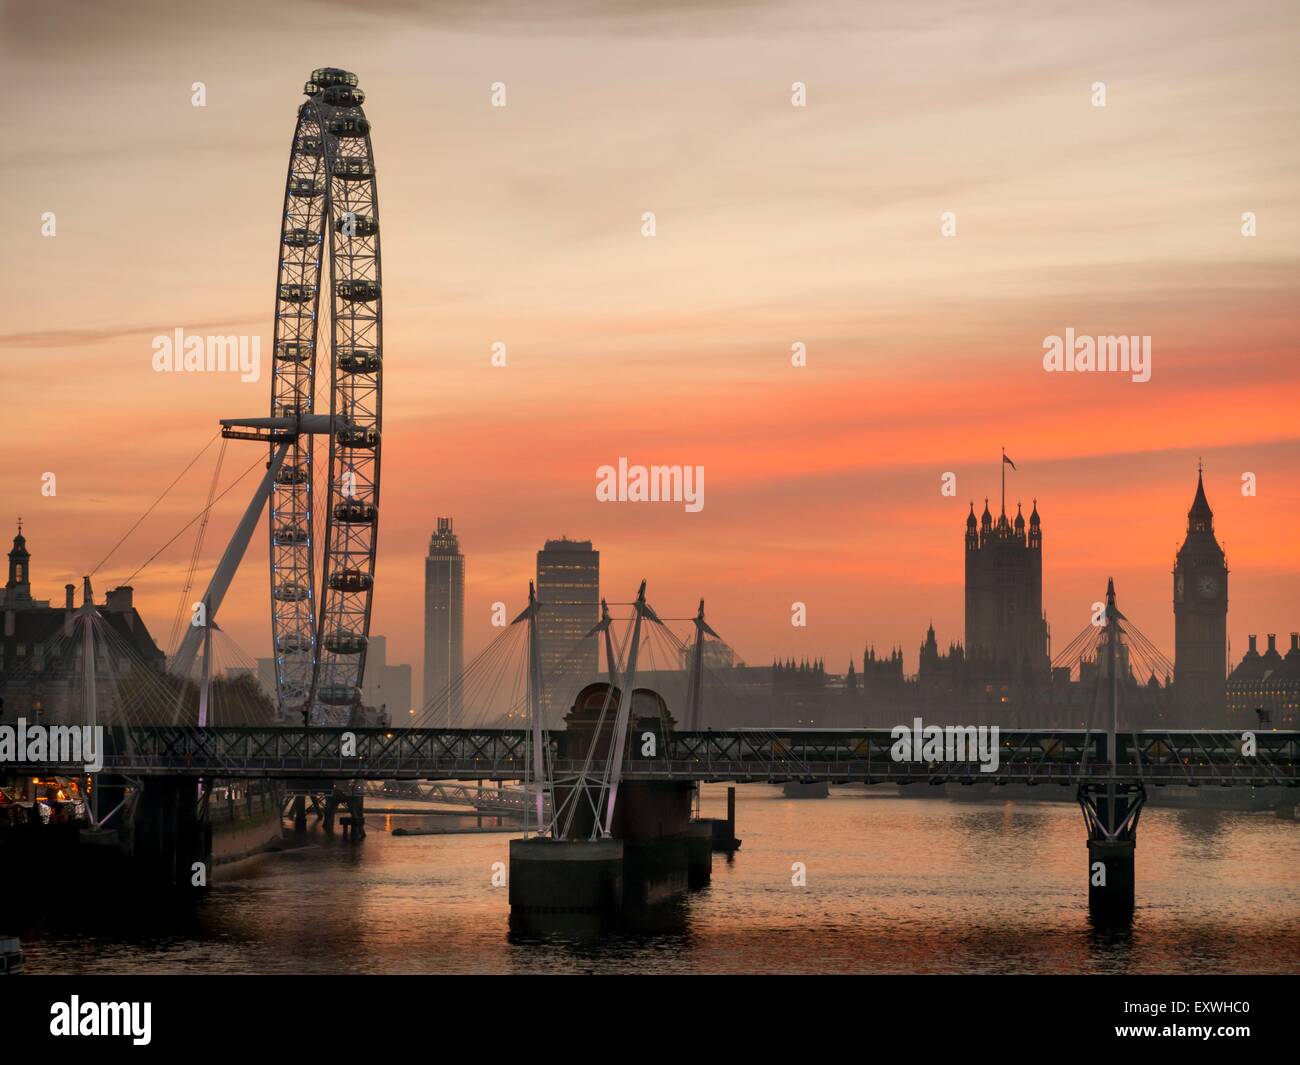 Skyline with London Eye and Hungerford Bridge, London, England, Great Britain, Europe Stock Photo